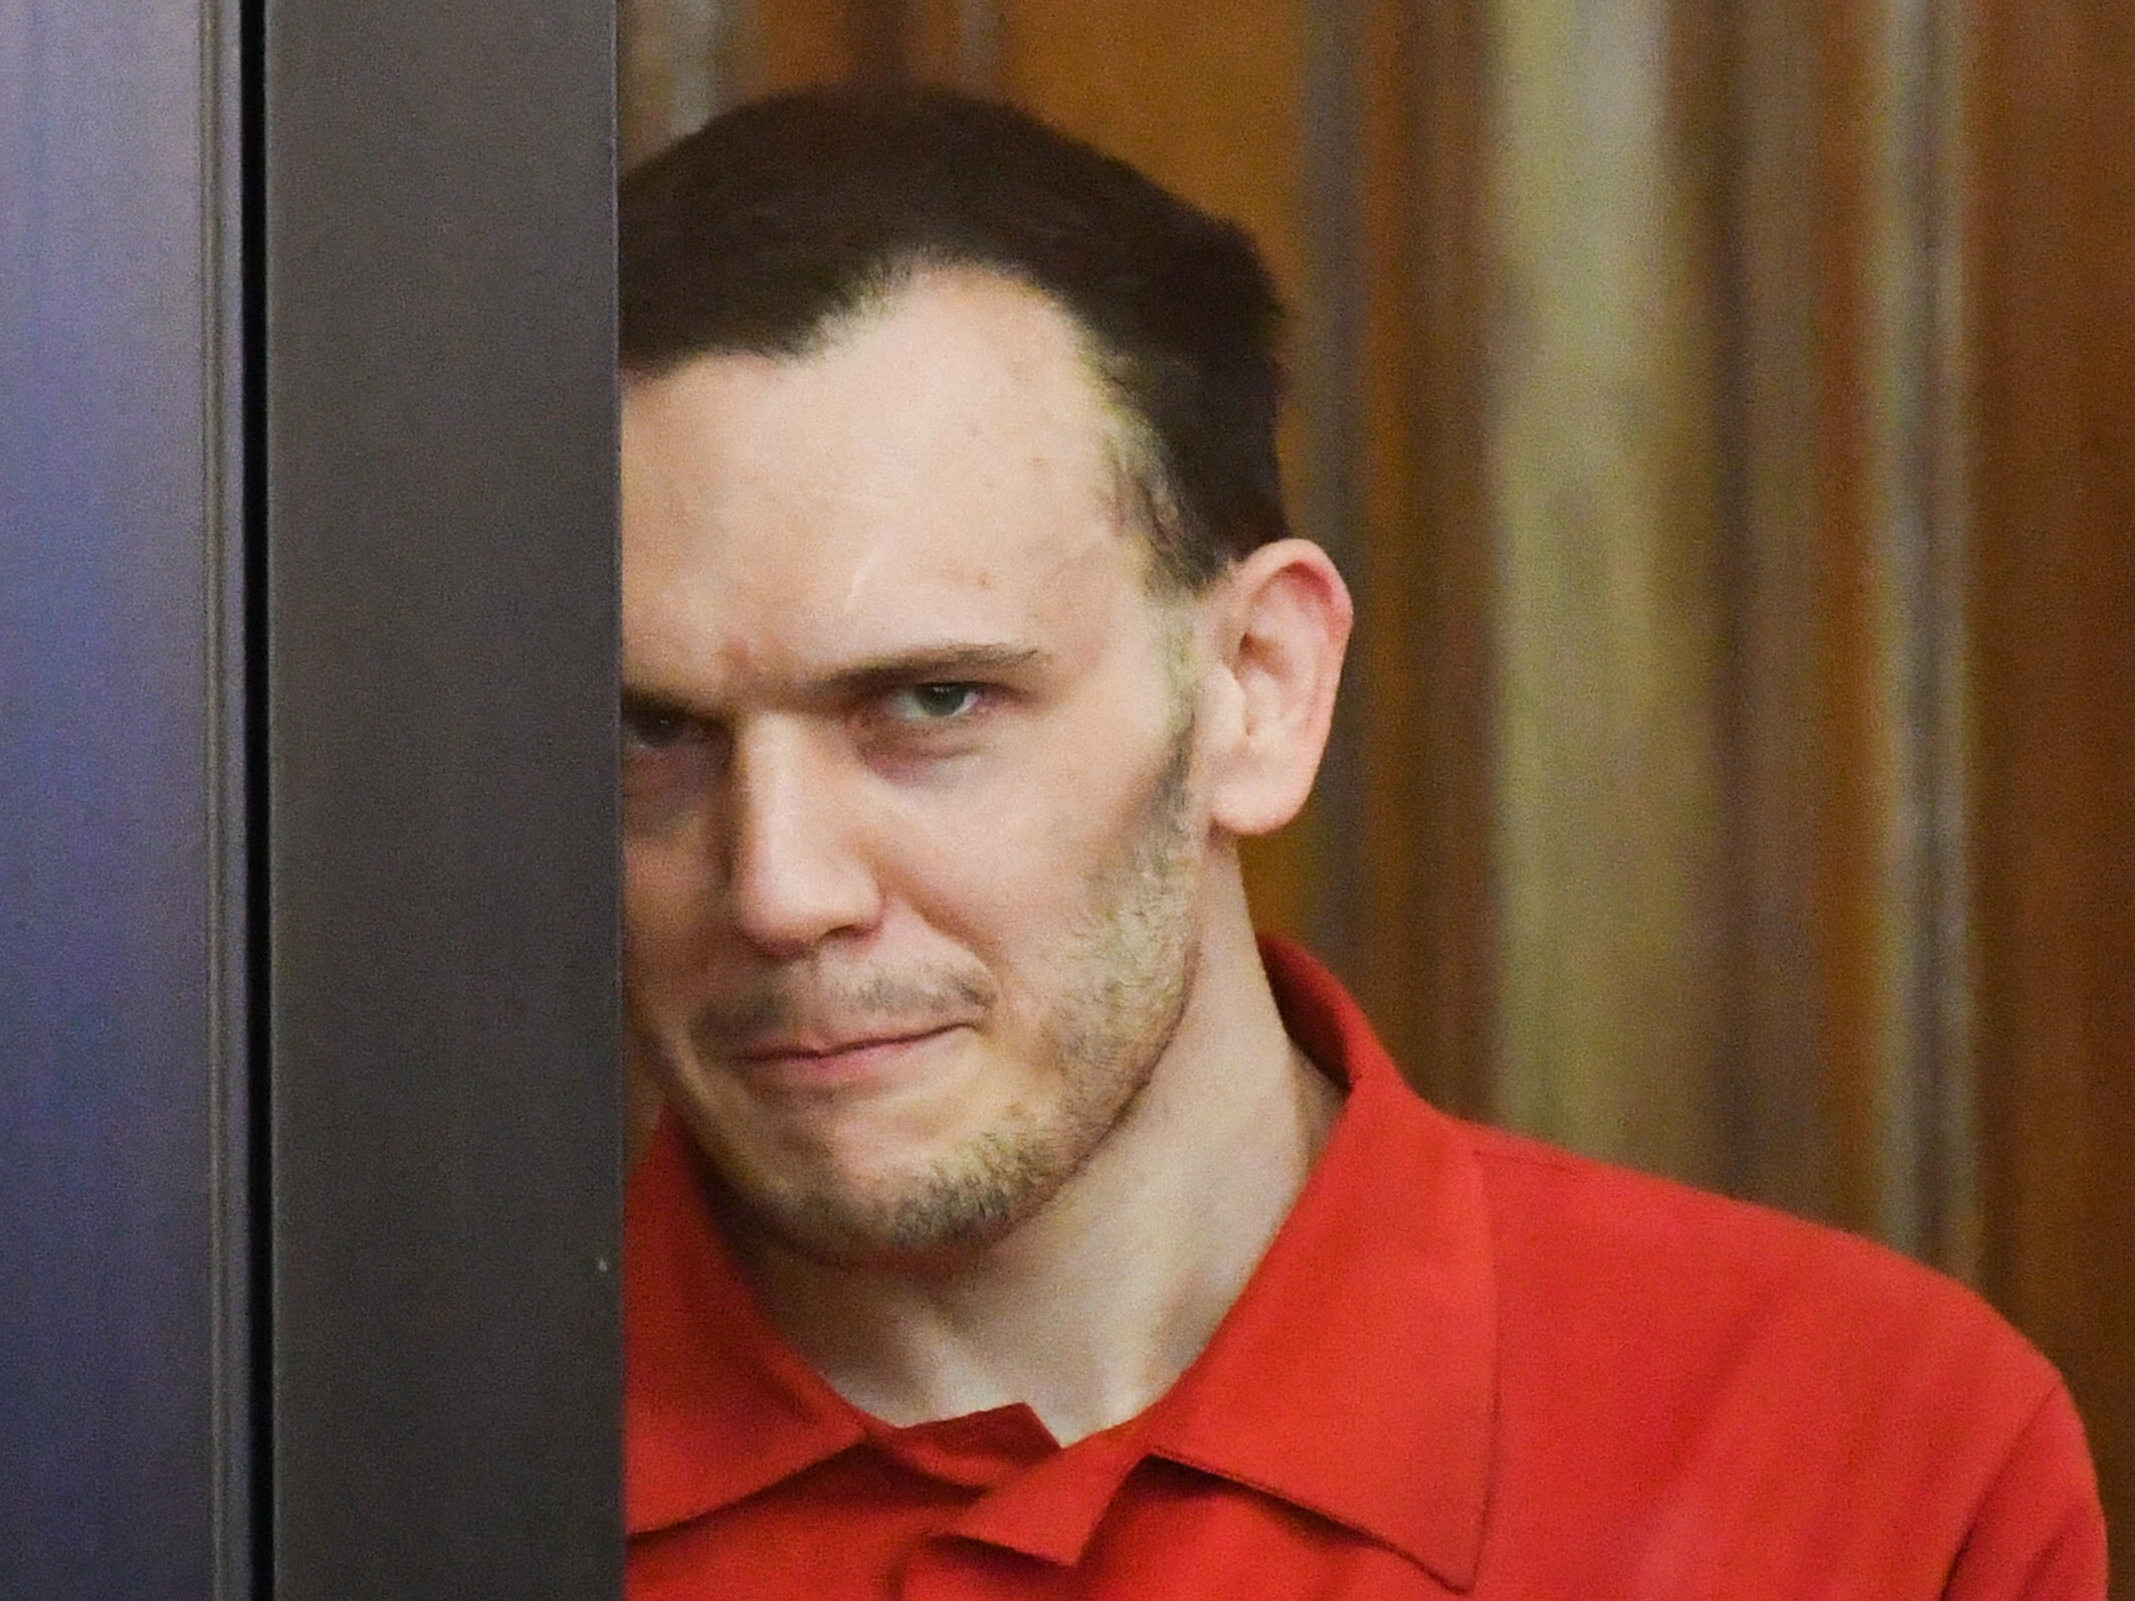 The mother of Adamowicz's killer revealed what her son said during the meetings.  “Mom, they say I killed someone.”